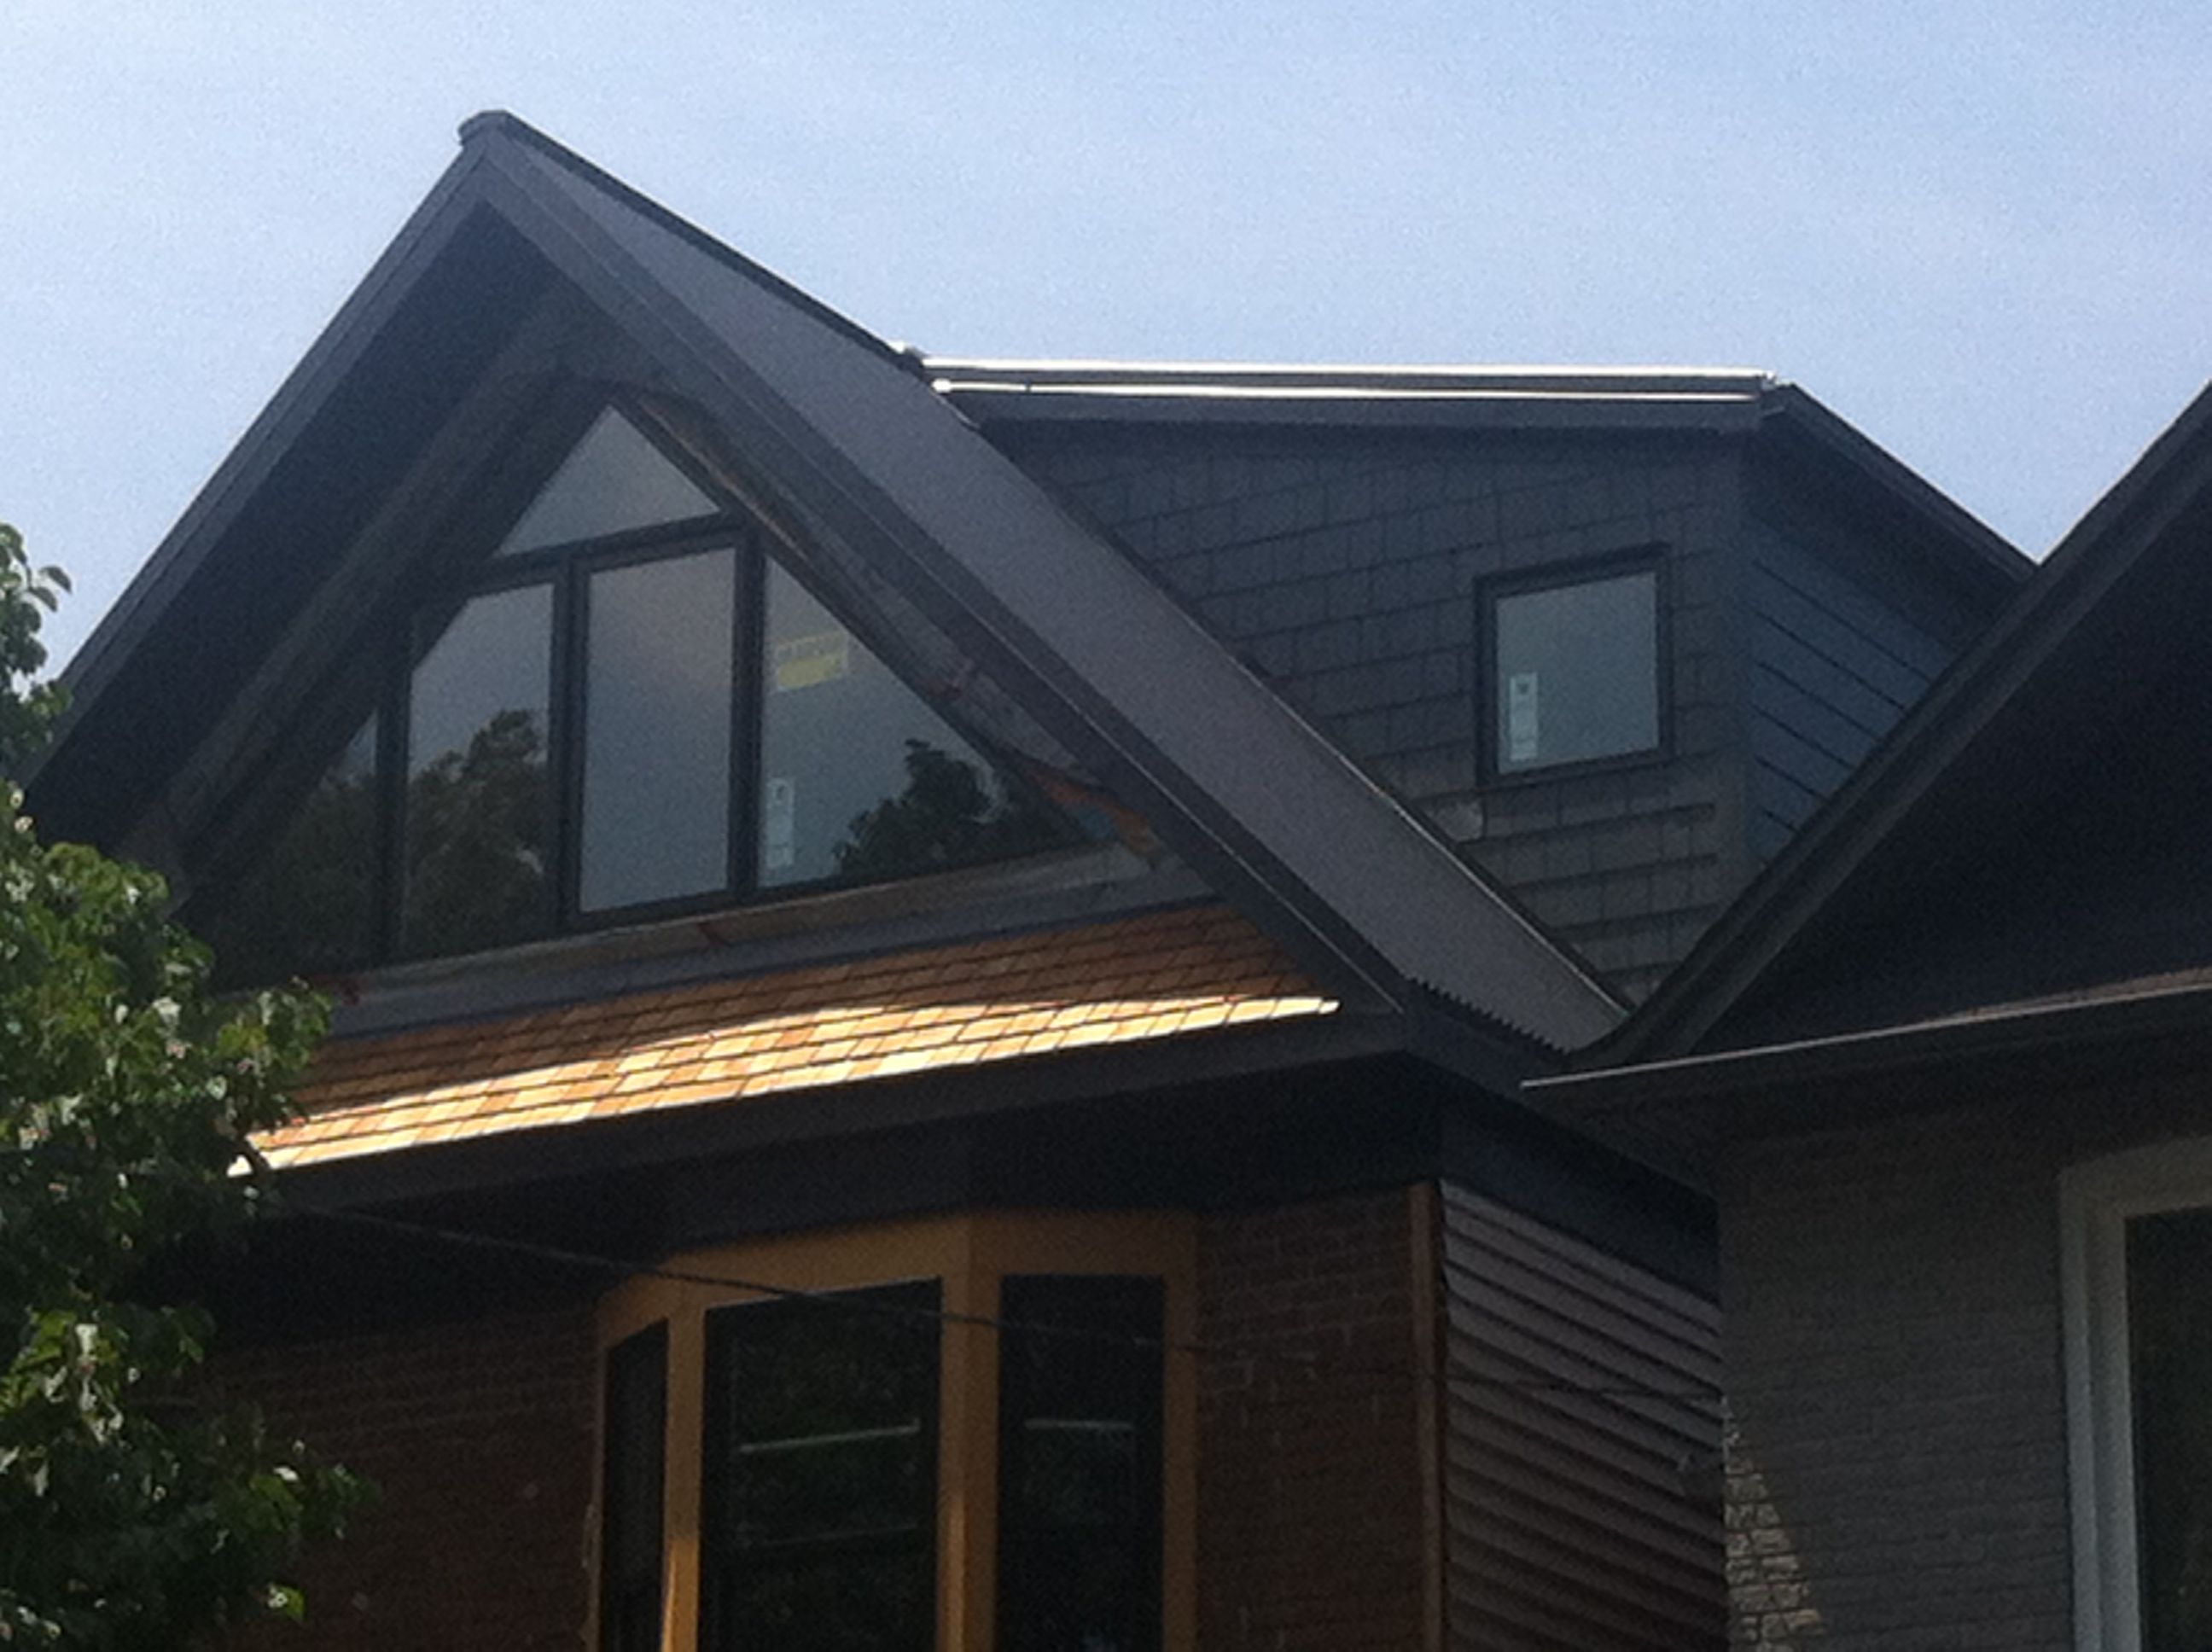 The roof from the street, with Hardie board siding